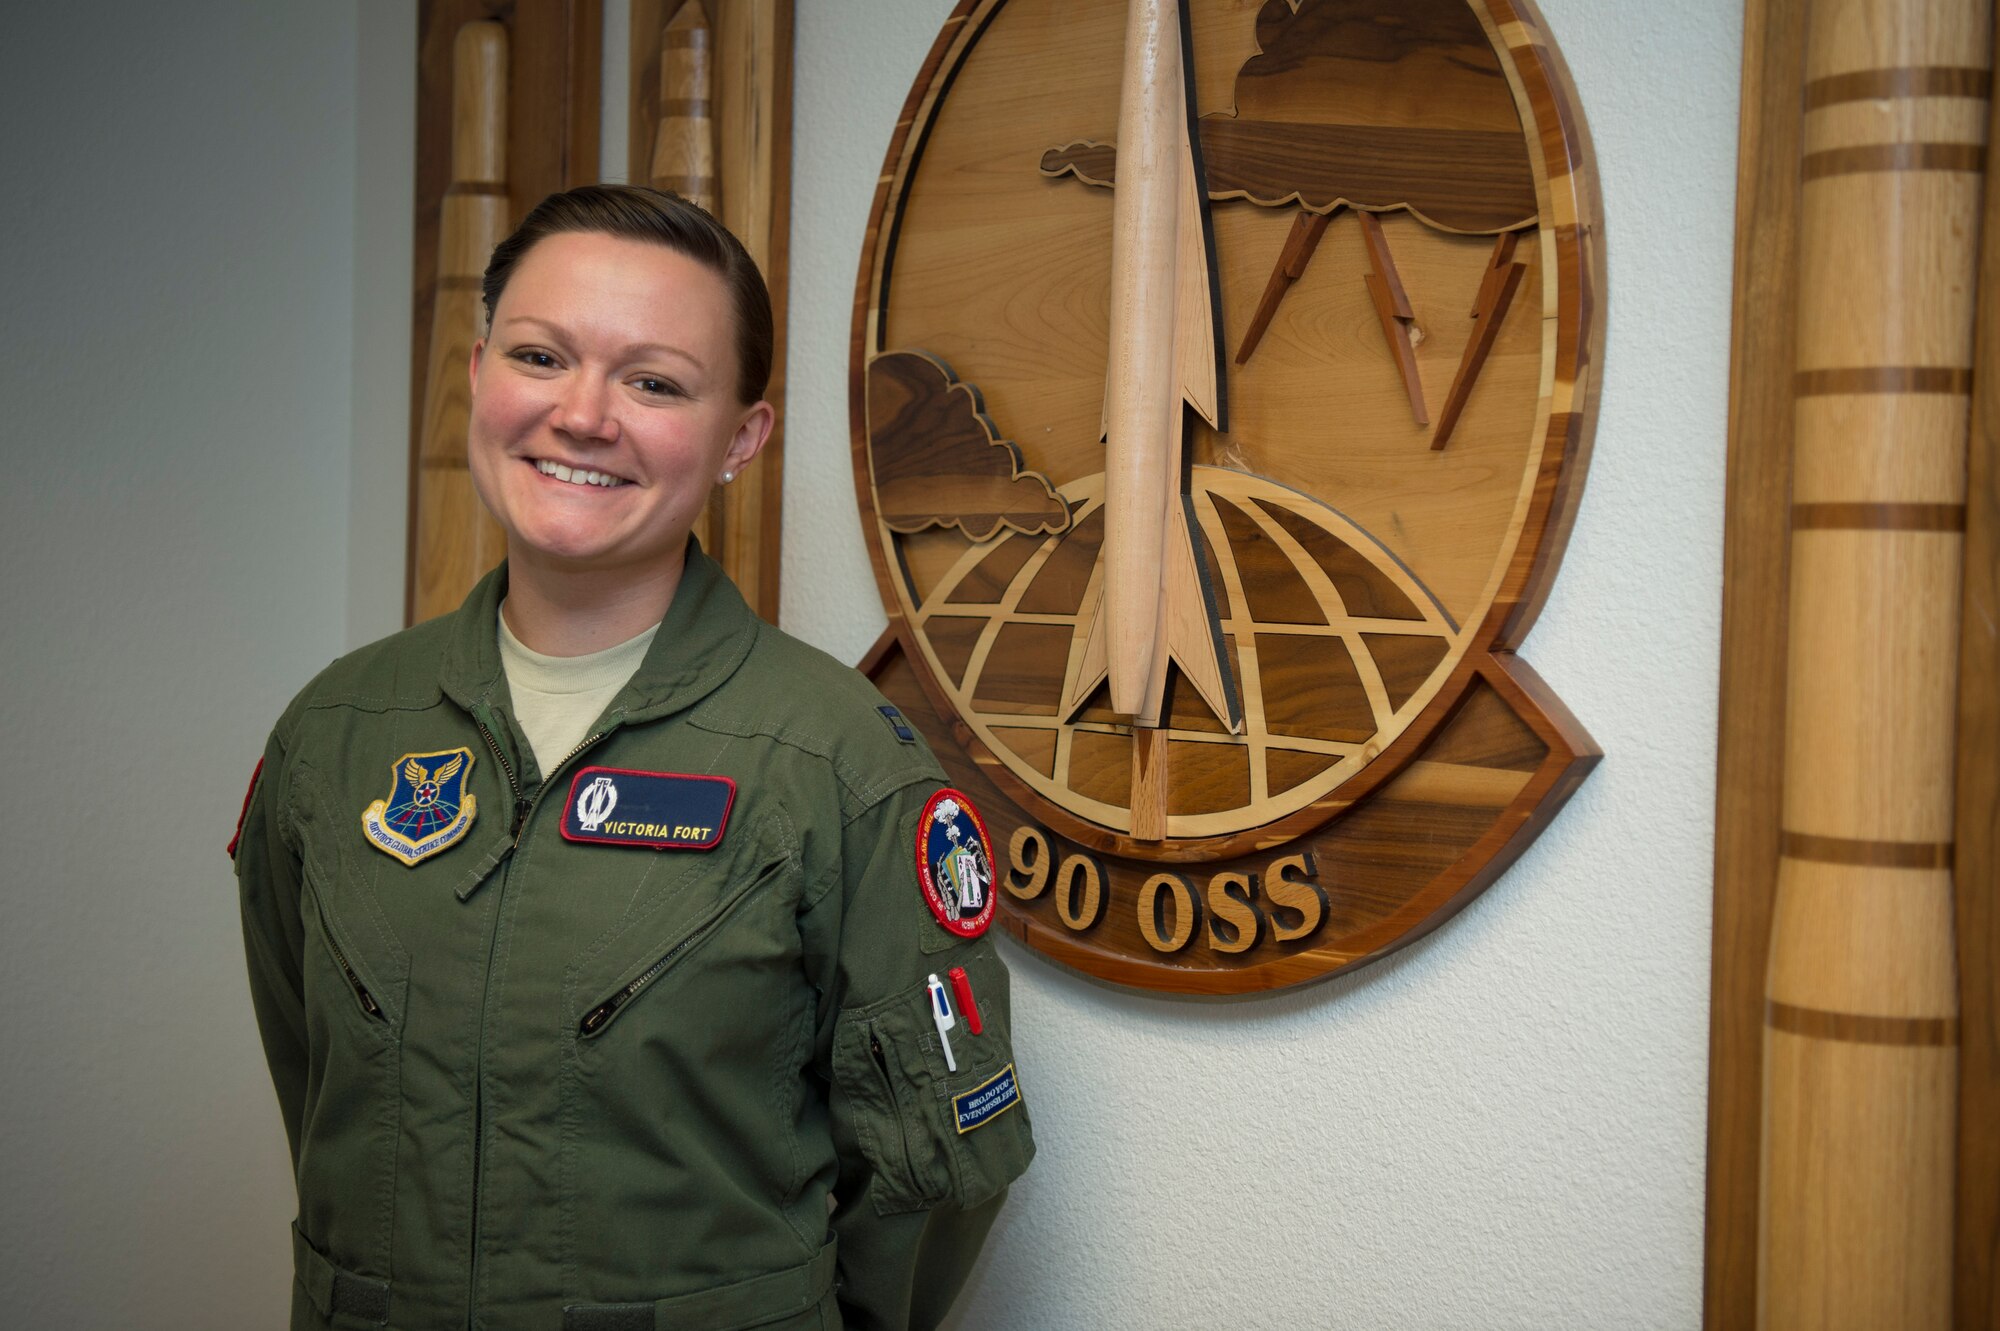 Capt. Victoria Fort, 90th Operational Support Squadron ICBM emergency war order planner, poses for a photo in front of the 90th OSS patch at F.E. Warren Air Force Base, Wyo., Sept. 20, 2016. The 90th OSS is part of the 90th Operations Group, which is charged with the control of 15 Missile Alert Facilities and 150 Minuteman III ICBMs in a 9,600 square mile area covering three states. (U.S. Air Force photo by Staff Sgt. Christopher Ruano)